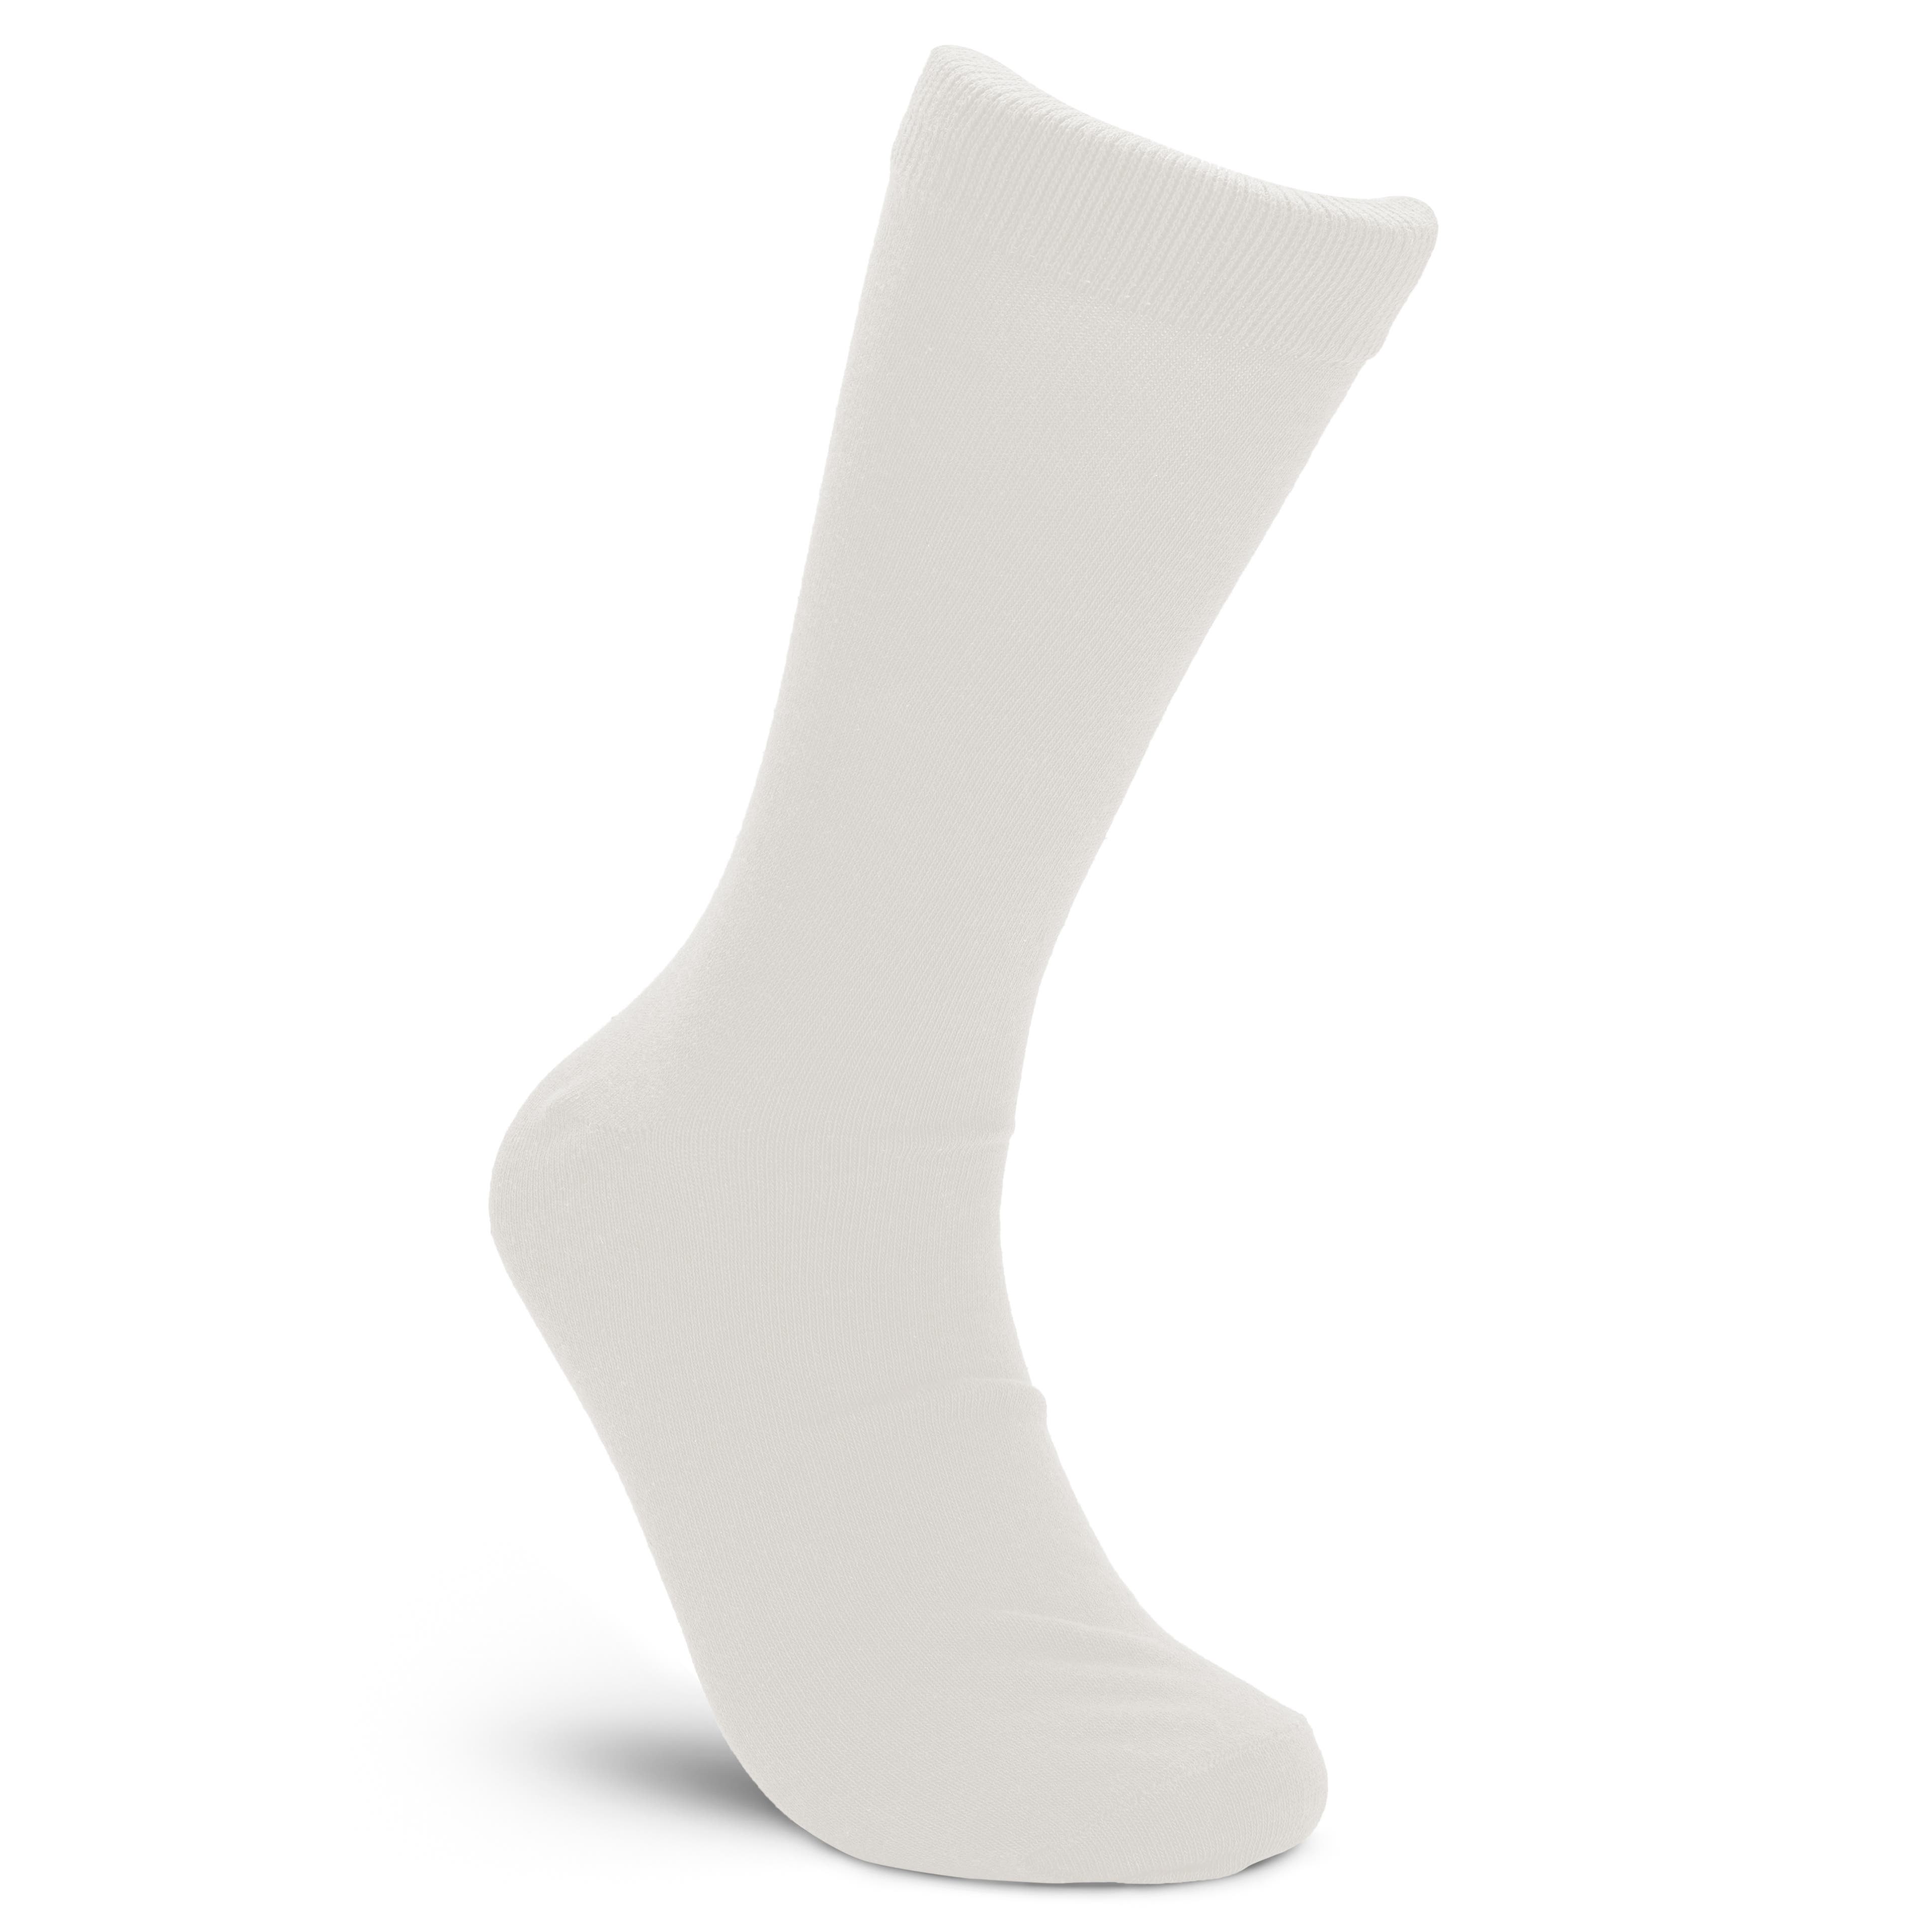 Magnus | Chaussettes blanches